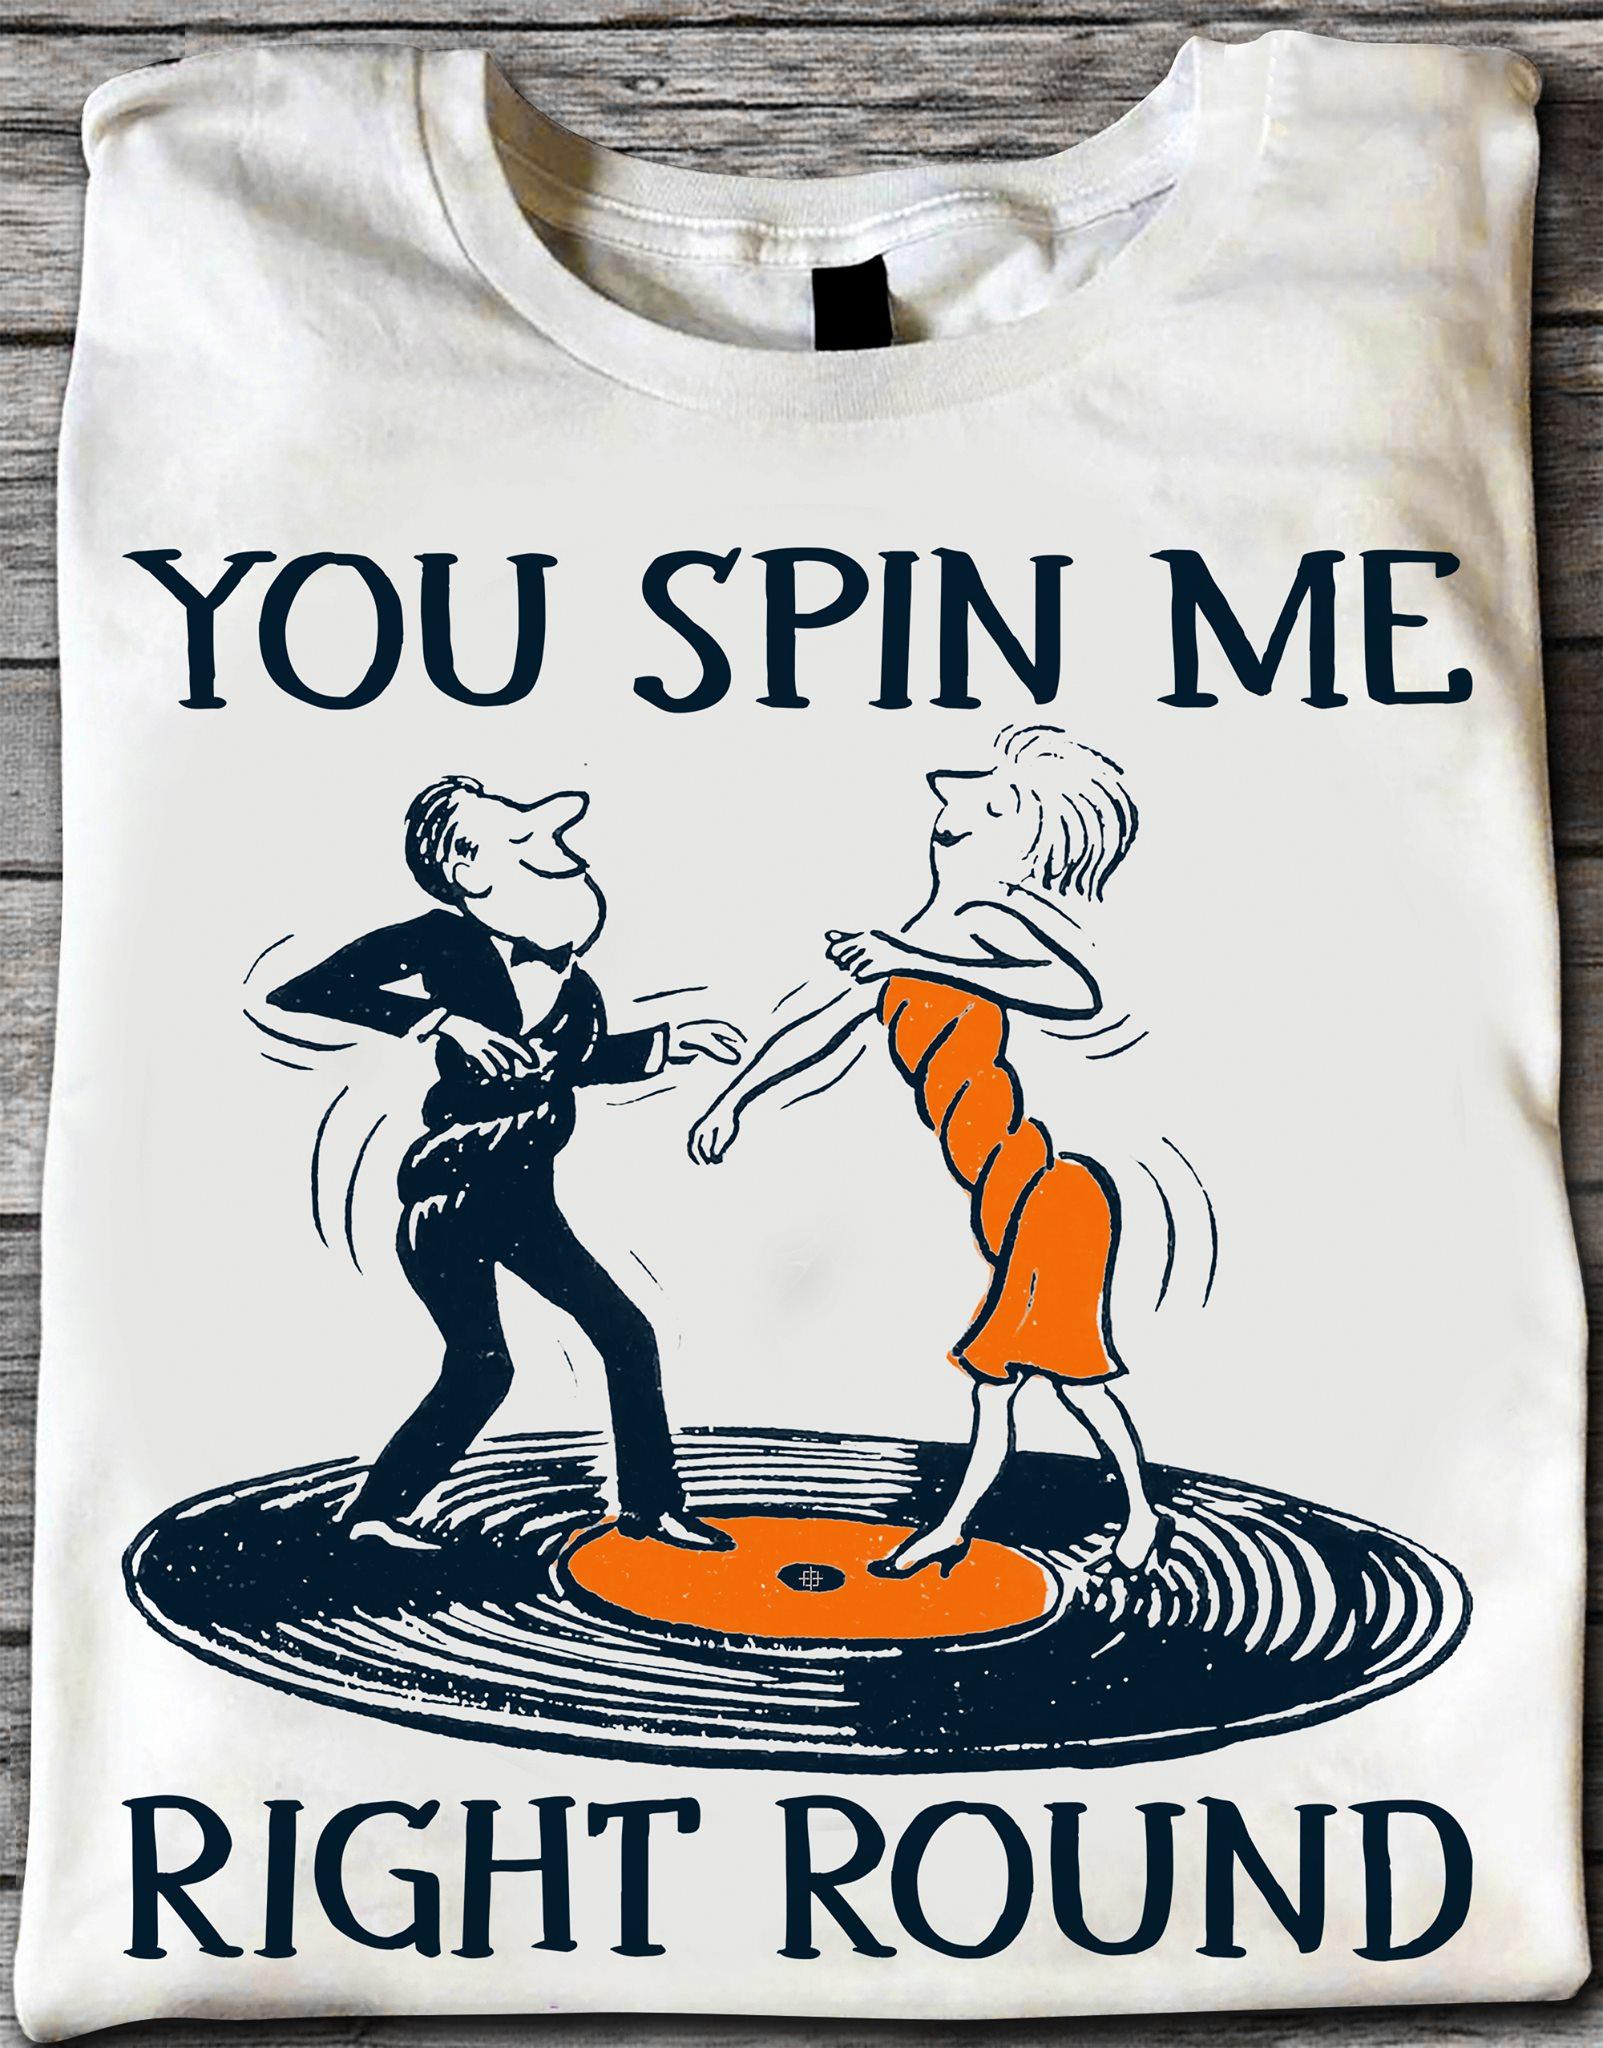 You spin me right round - Vinyl record lover, couple dancing on vinyl